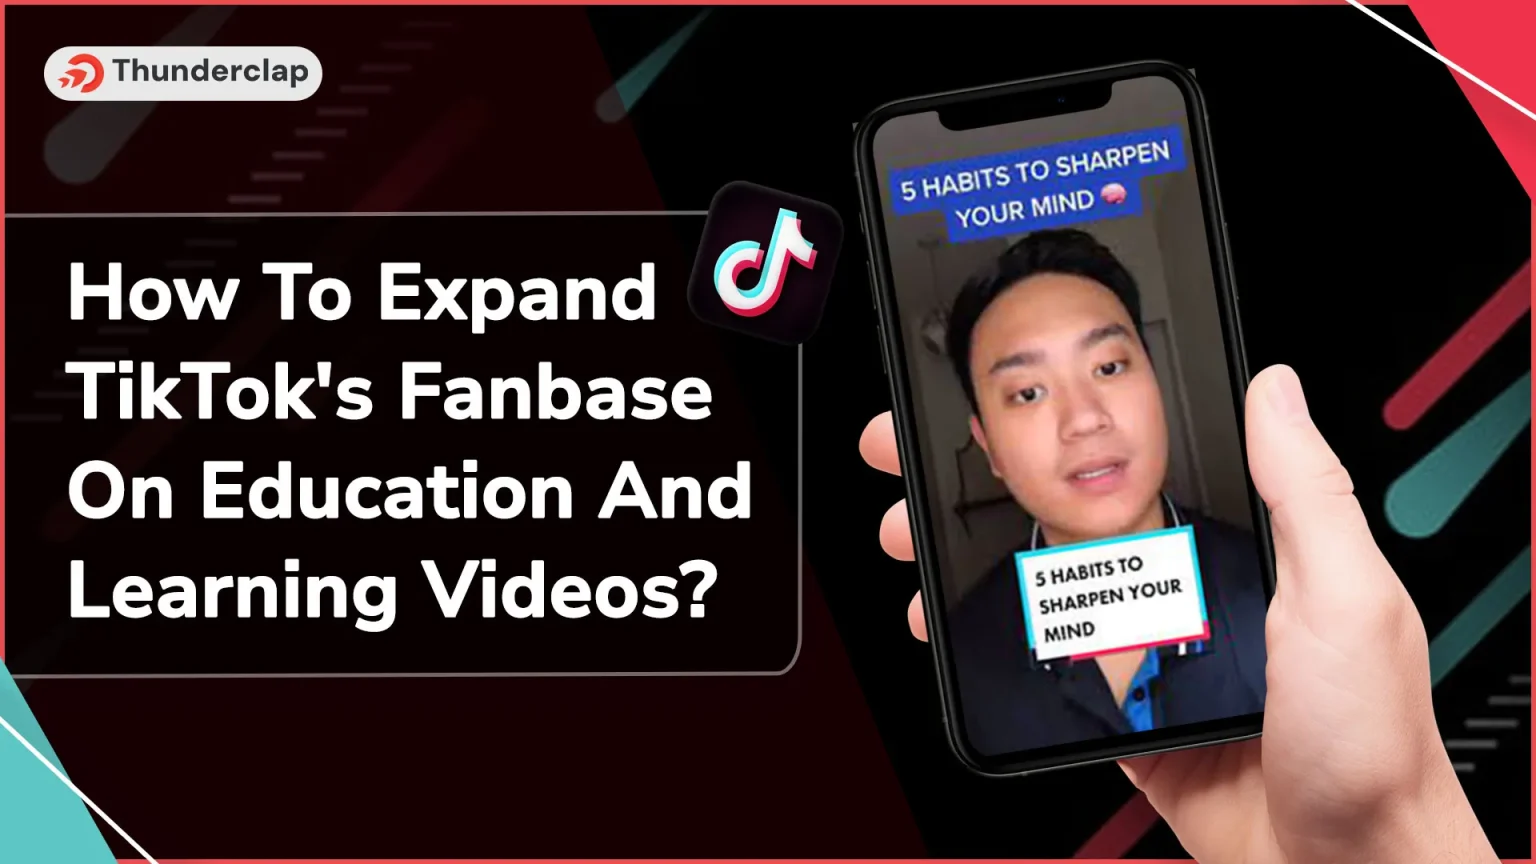 How To Expand TikTok’s Fanbase On Education And Learning Videos